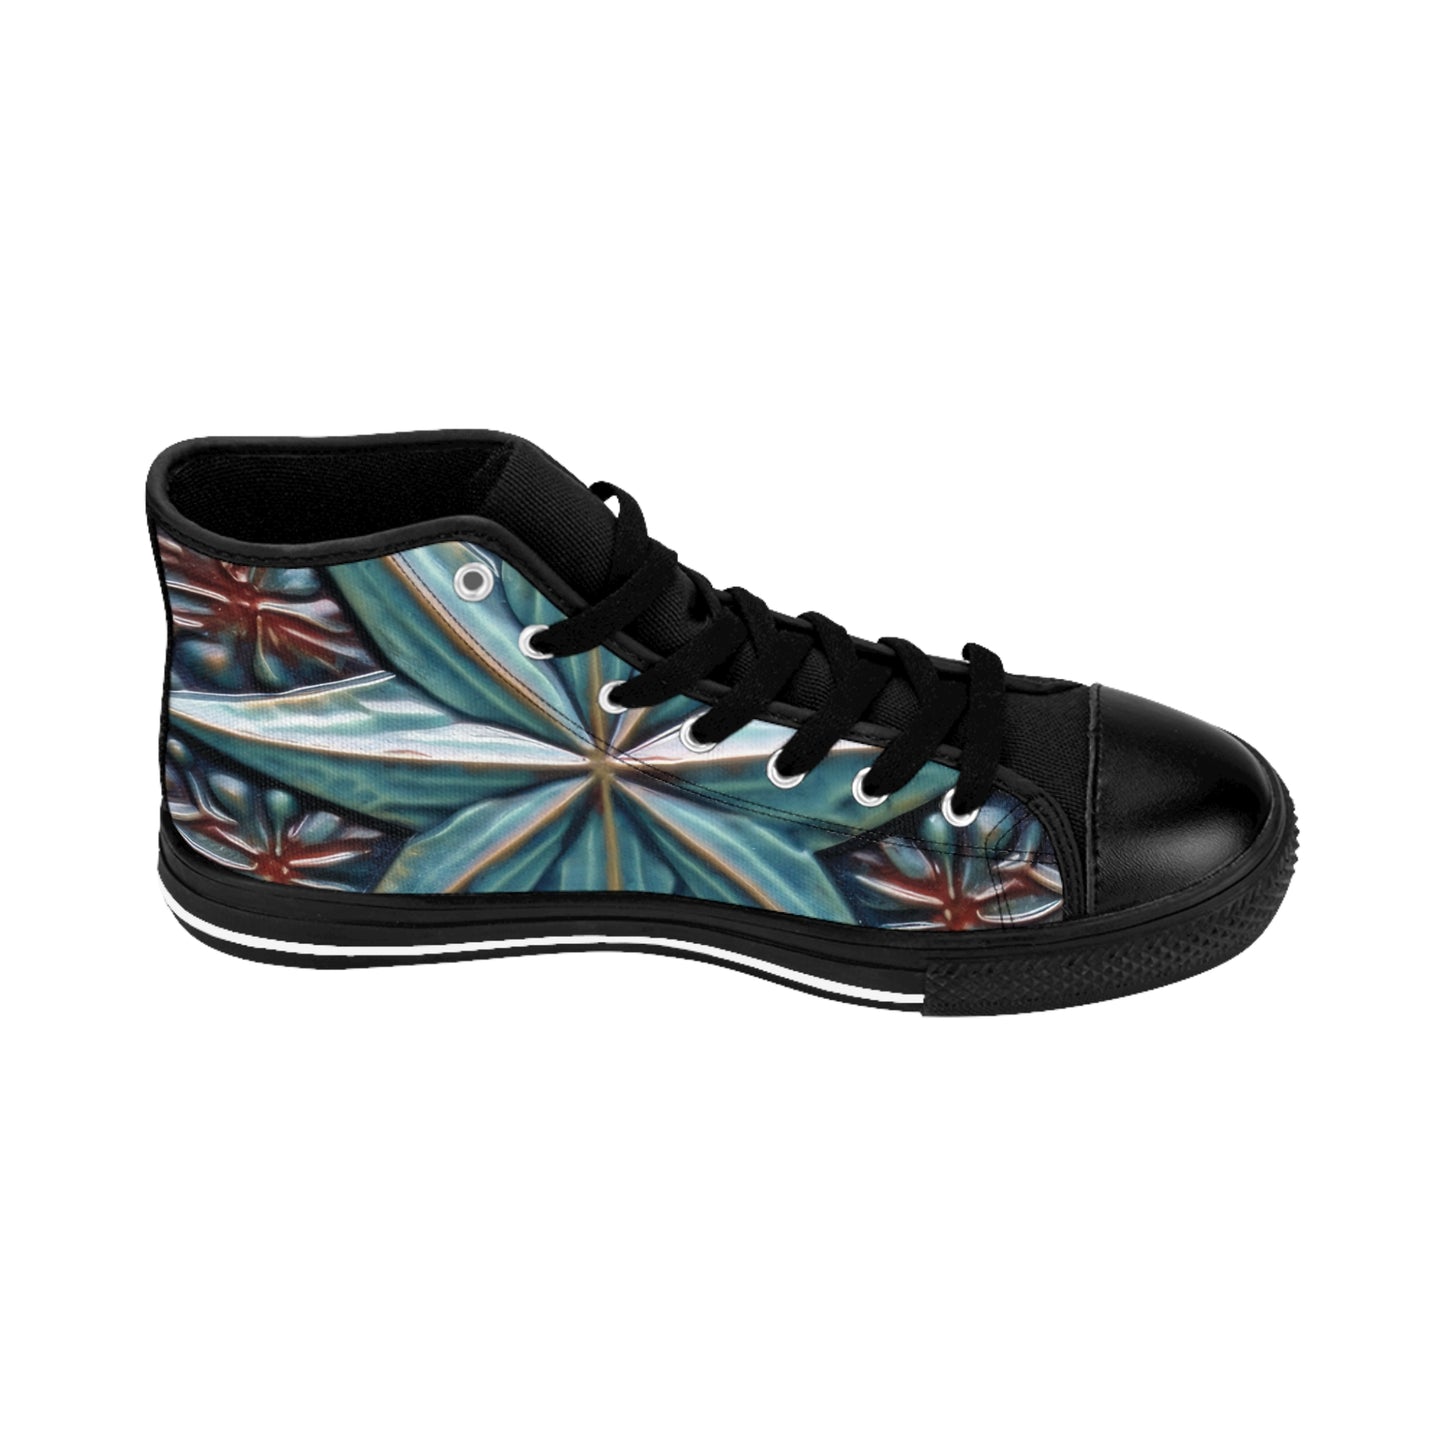 Beautiful Stars Abstract Star Style Blue And Red Men's Classic Sneakers